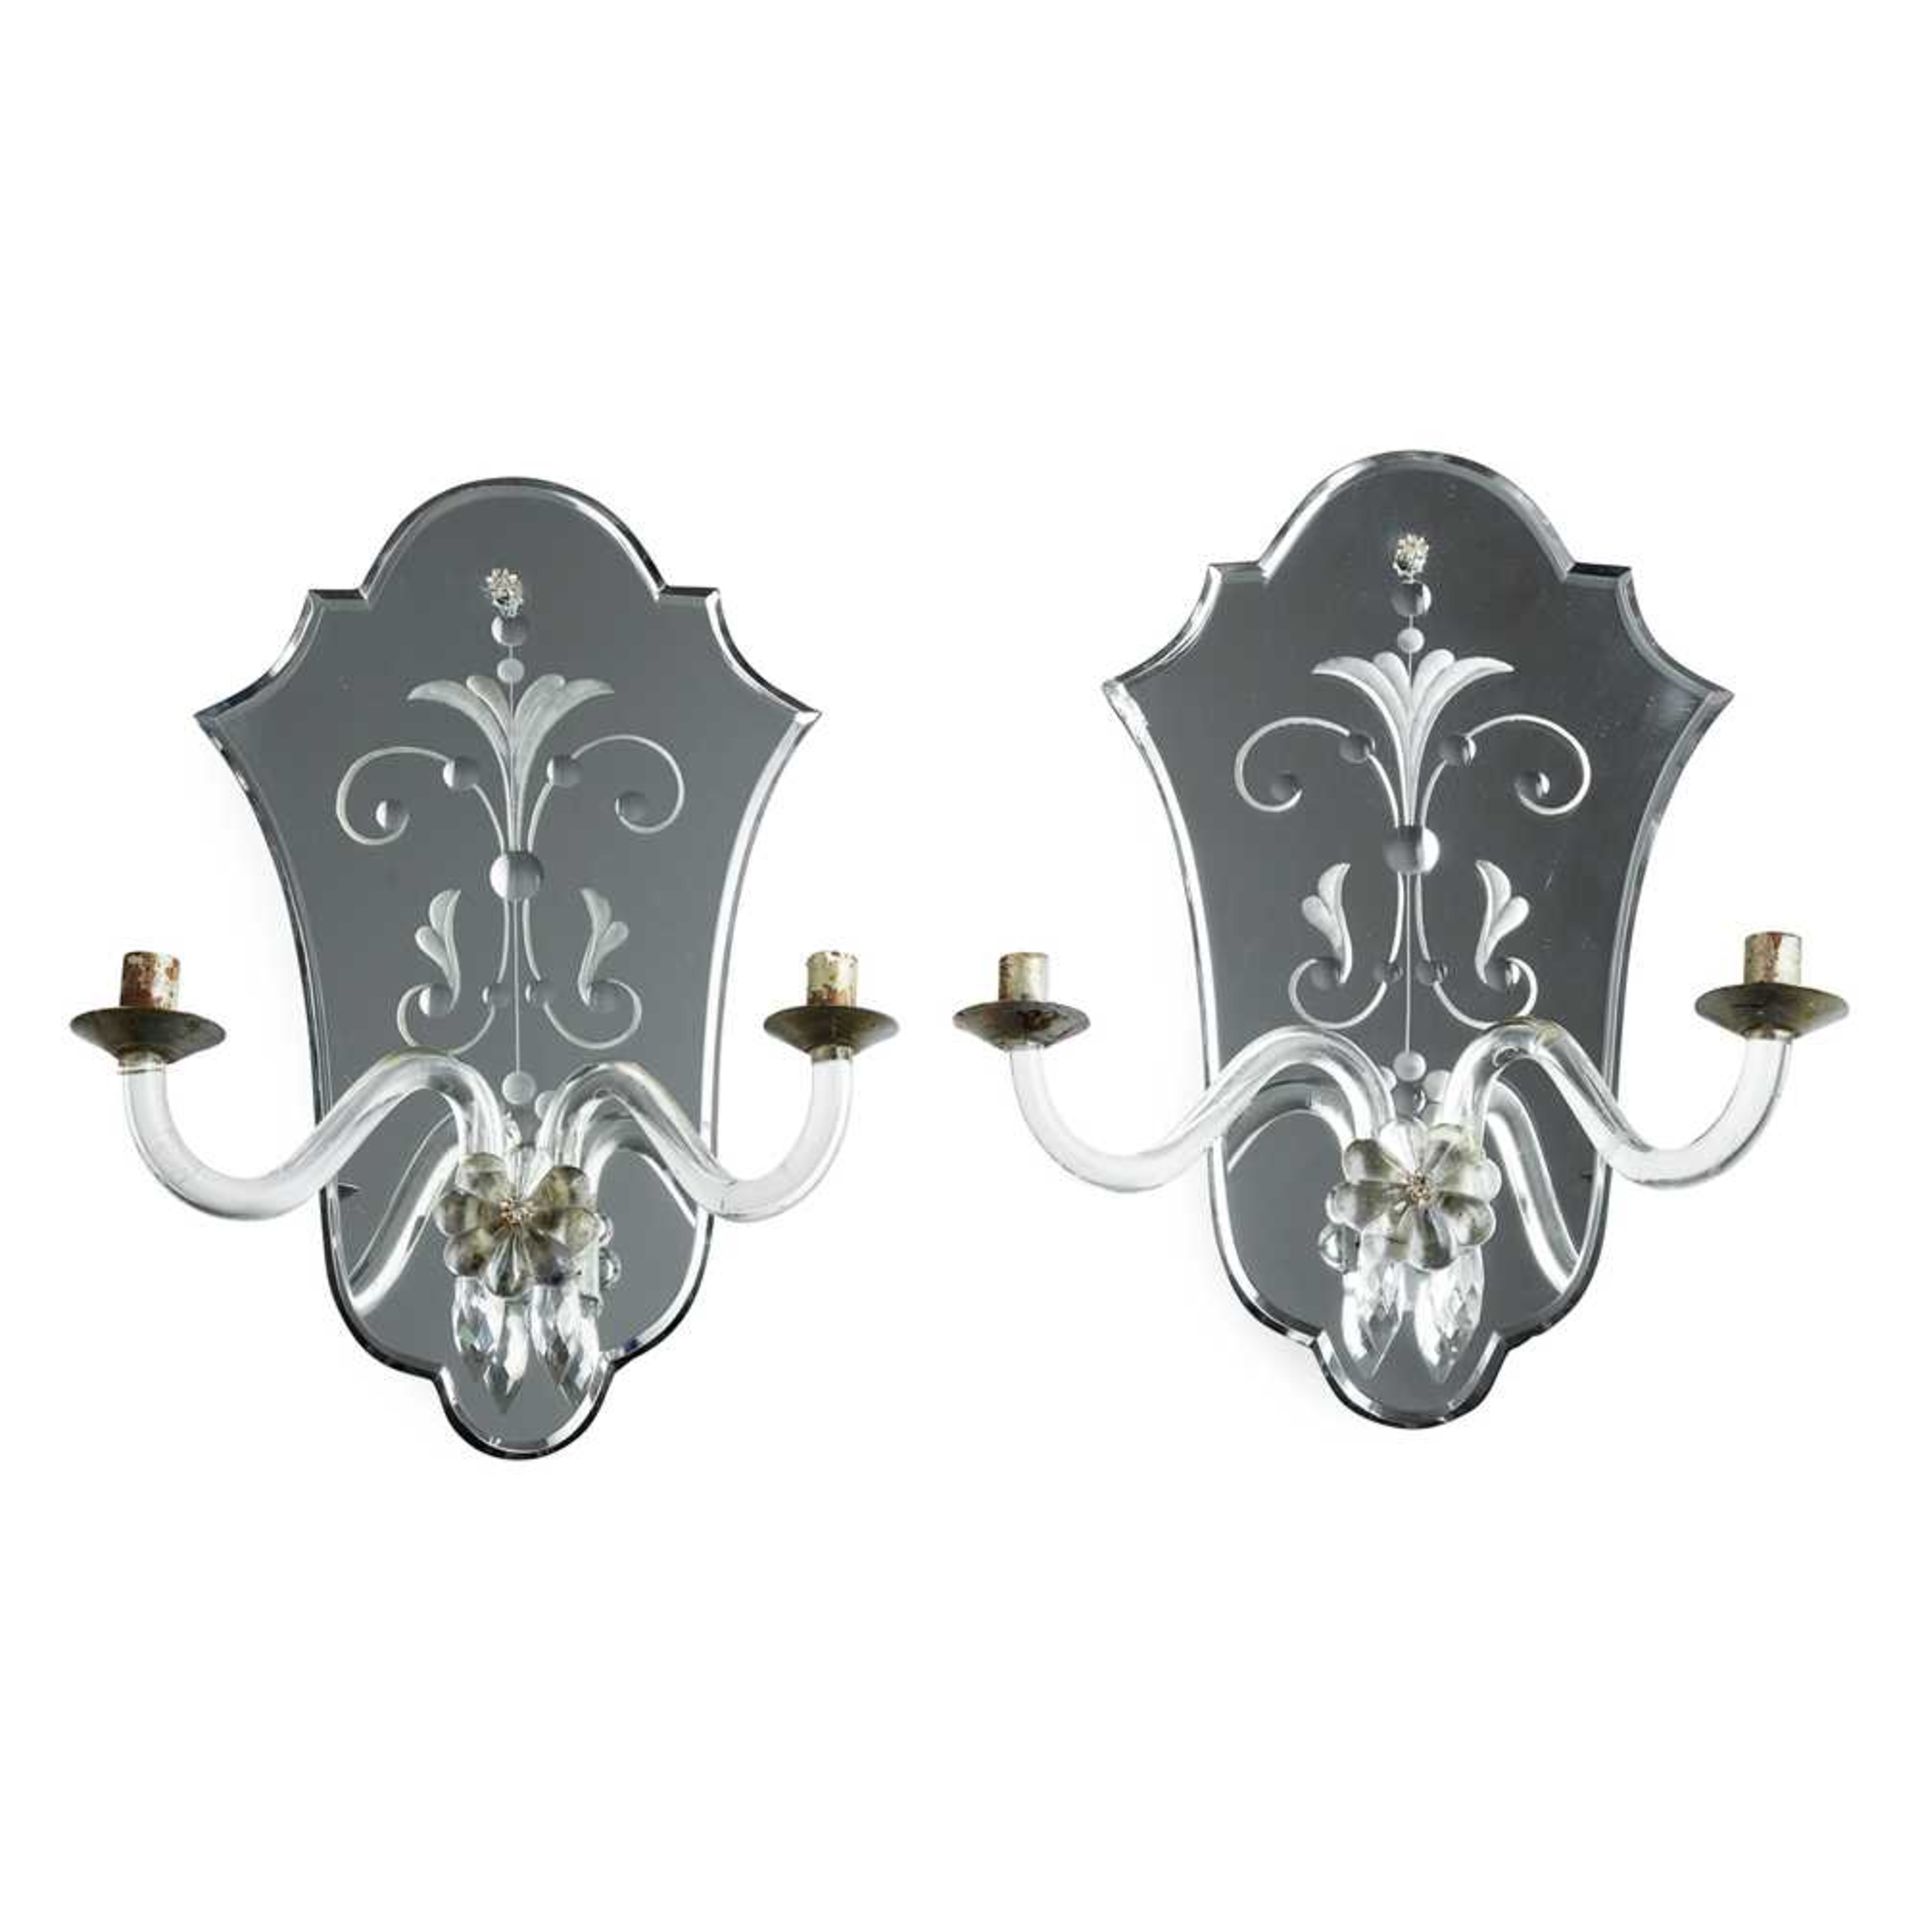 PAIR OF FRENCH ETCHED-GLASS WALL SCONCES EARLY 20TH CENTURY